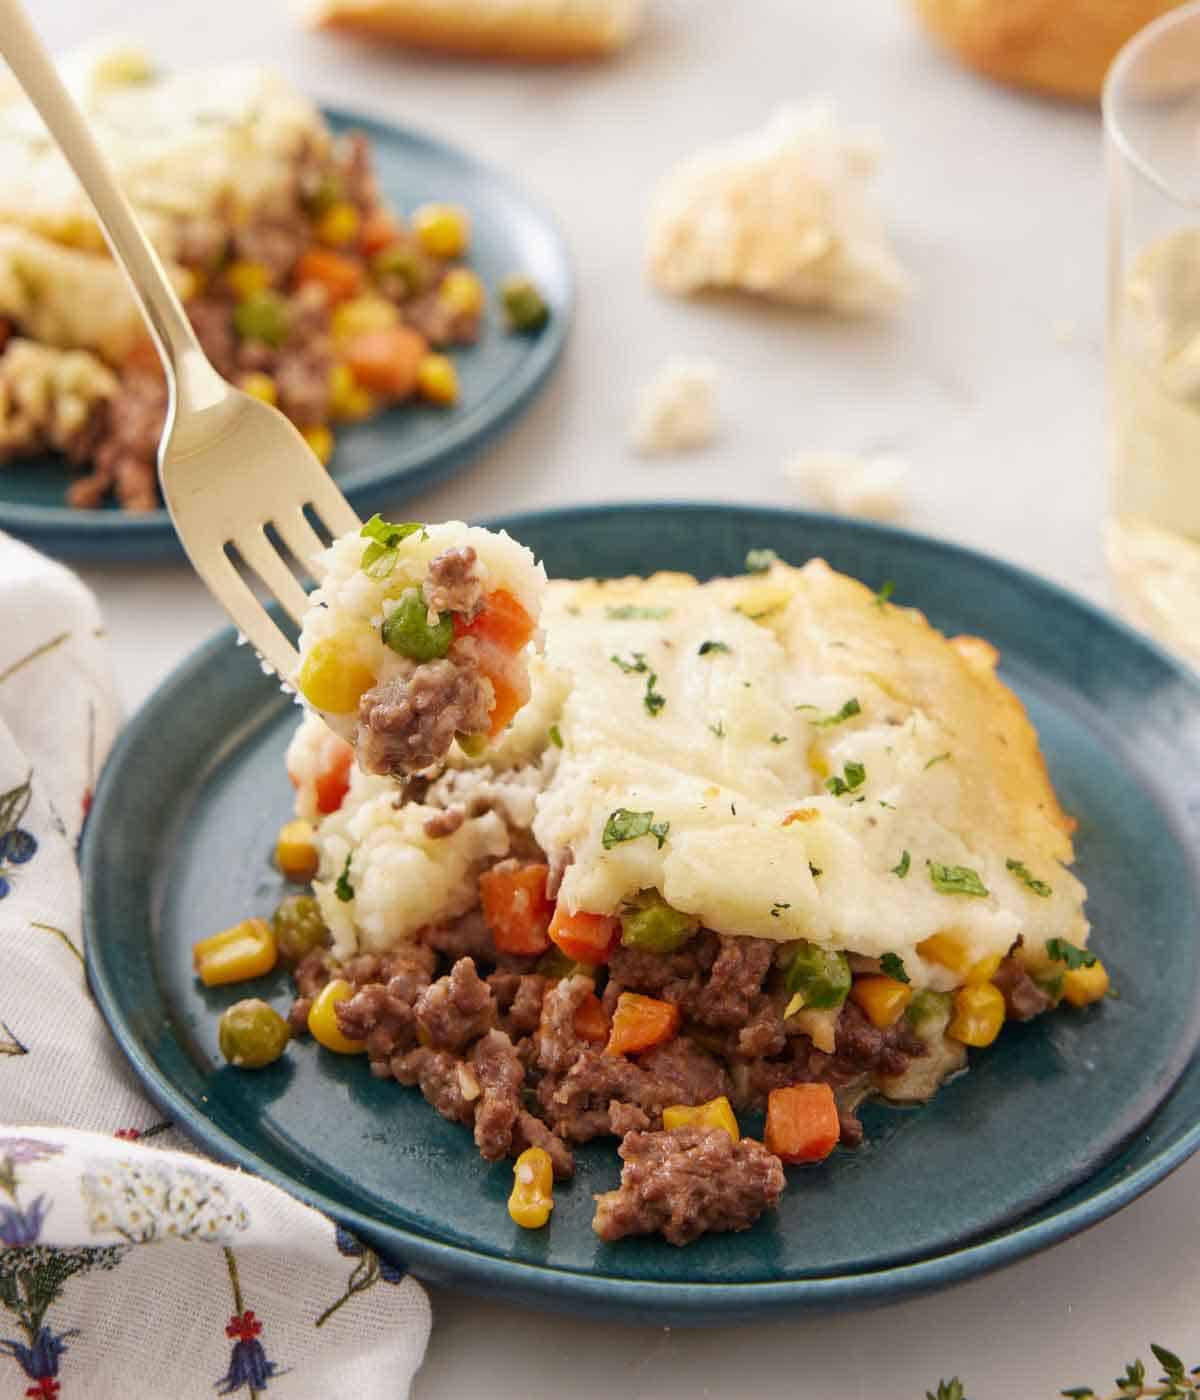 A forkful of shepherd's pie lifted from a plate, showing the mashed potatoes, meat, and vegetables.